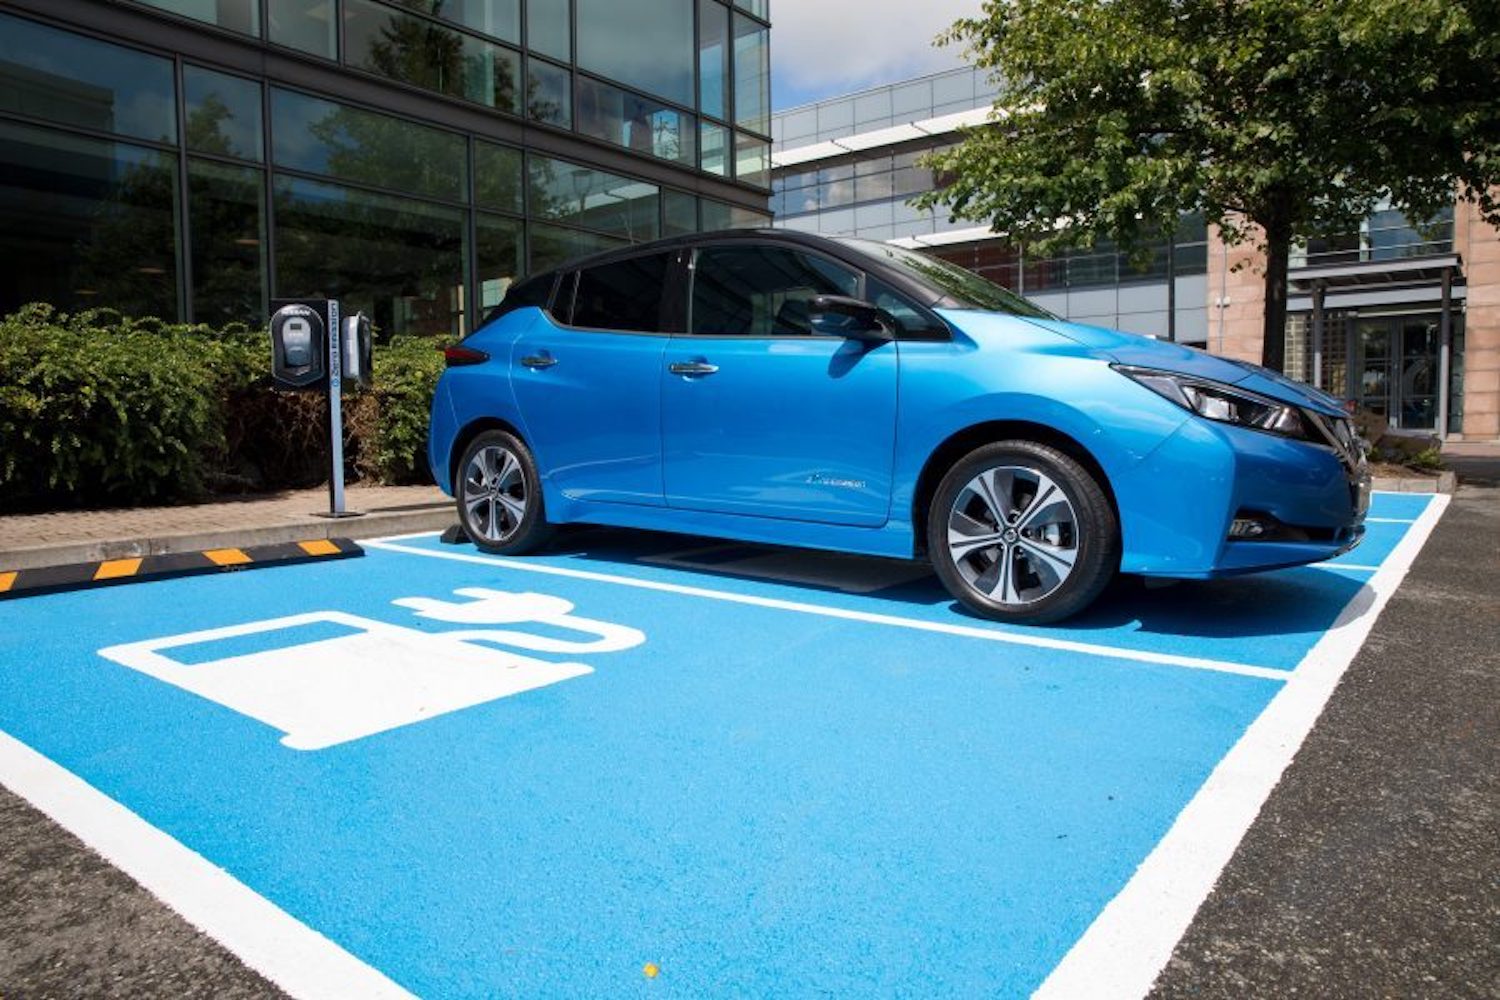 Car News | Quarter of new cars viewed on Carzone are electric | CompleteCar.ie